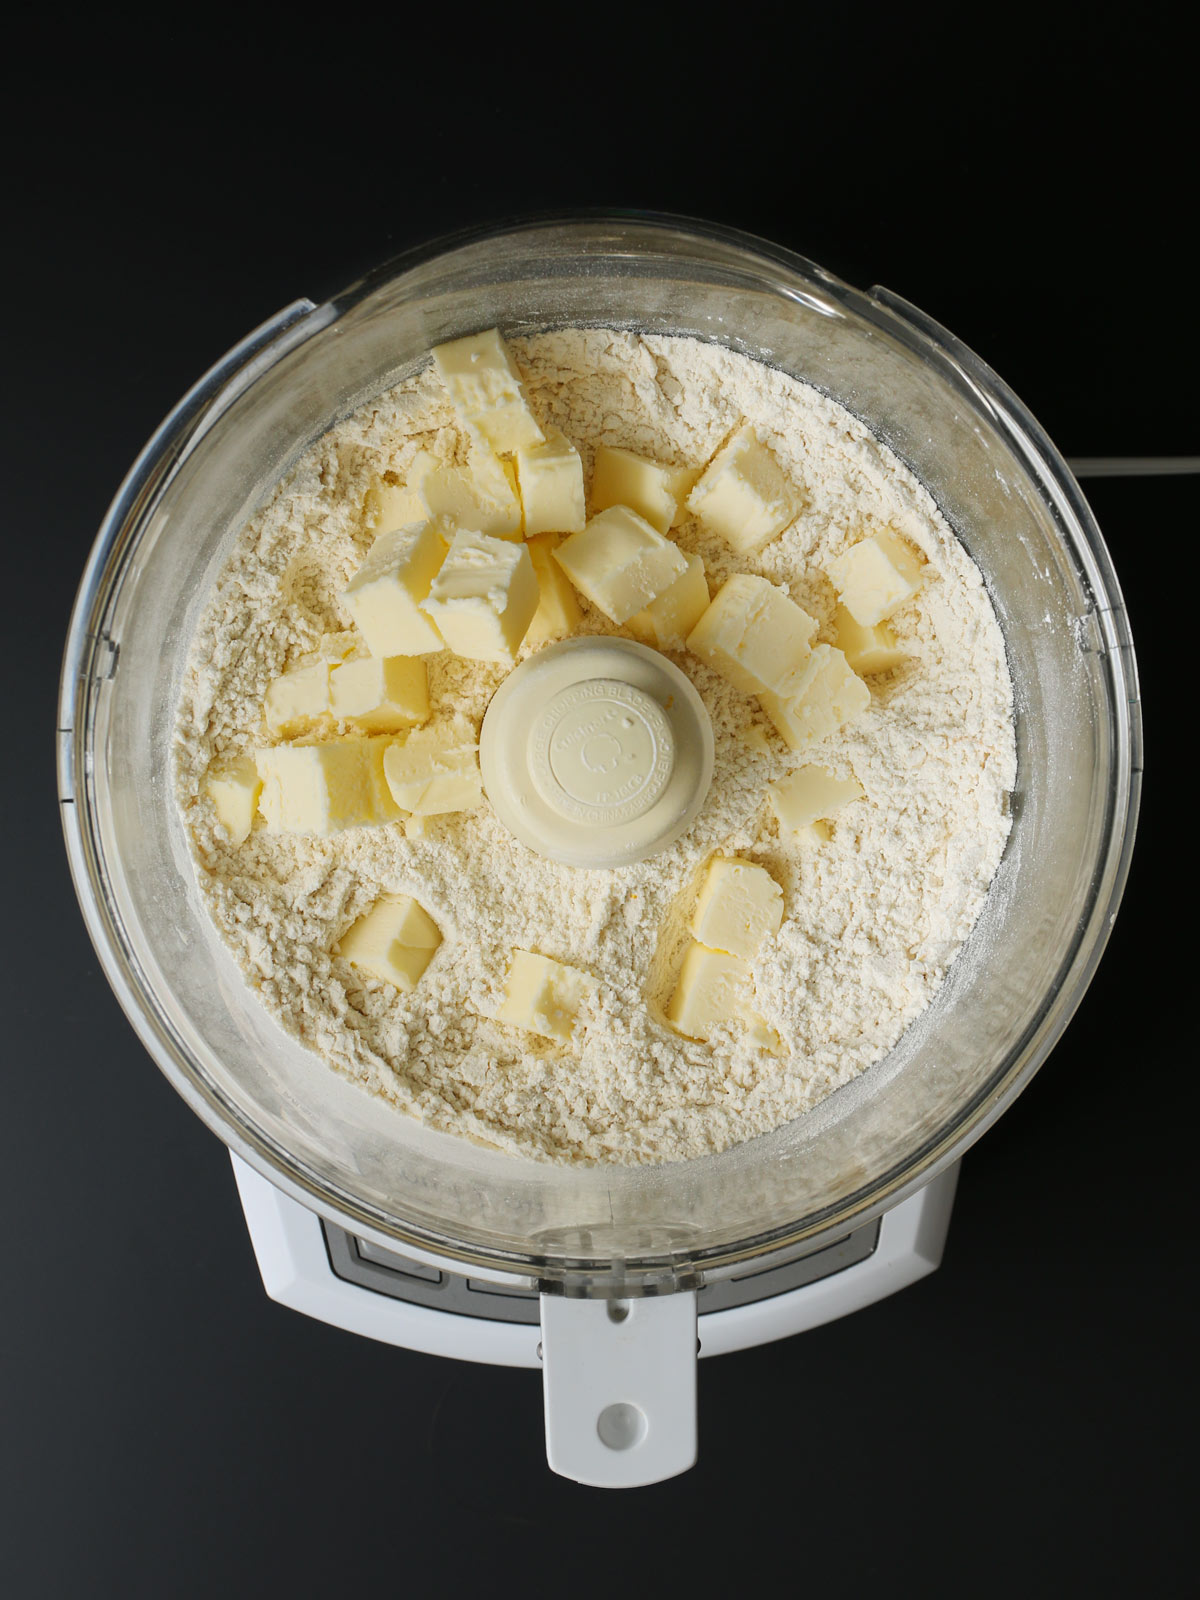 butter cubes added to food processor bowl.